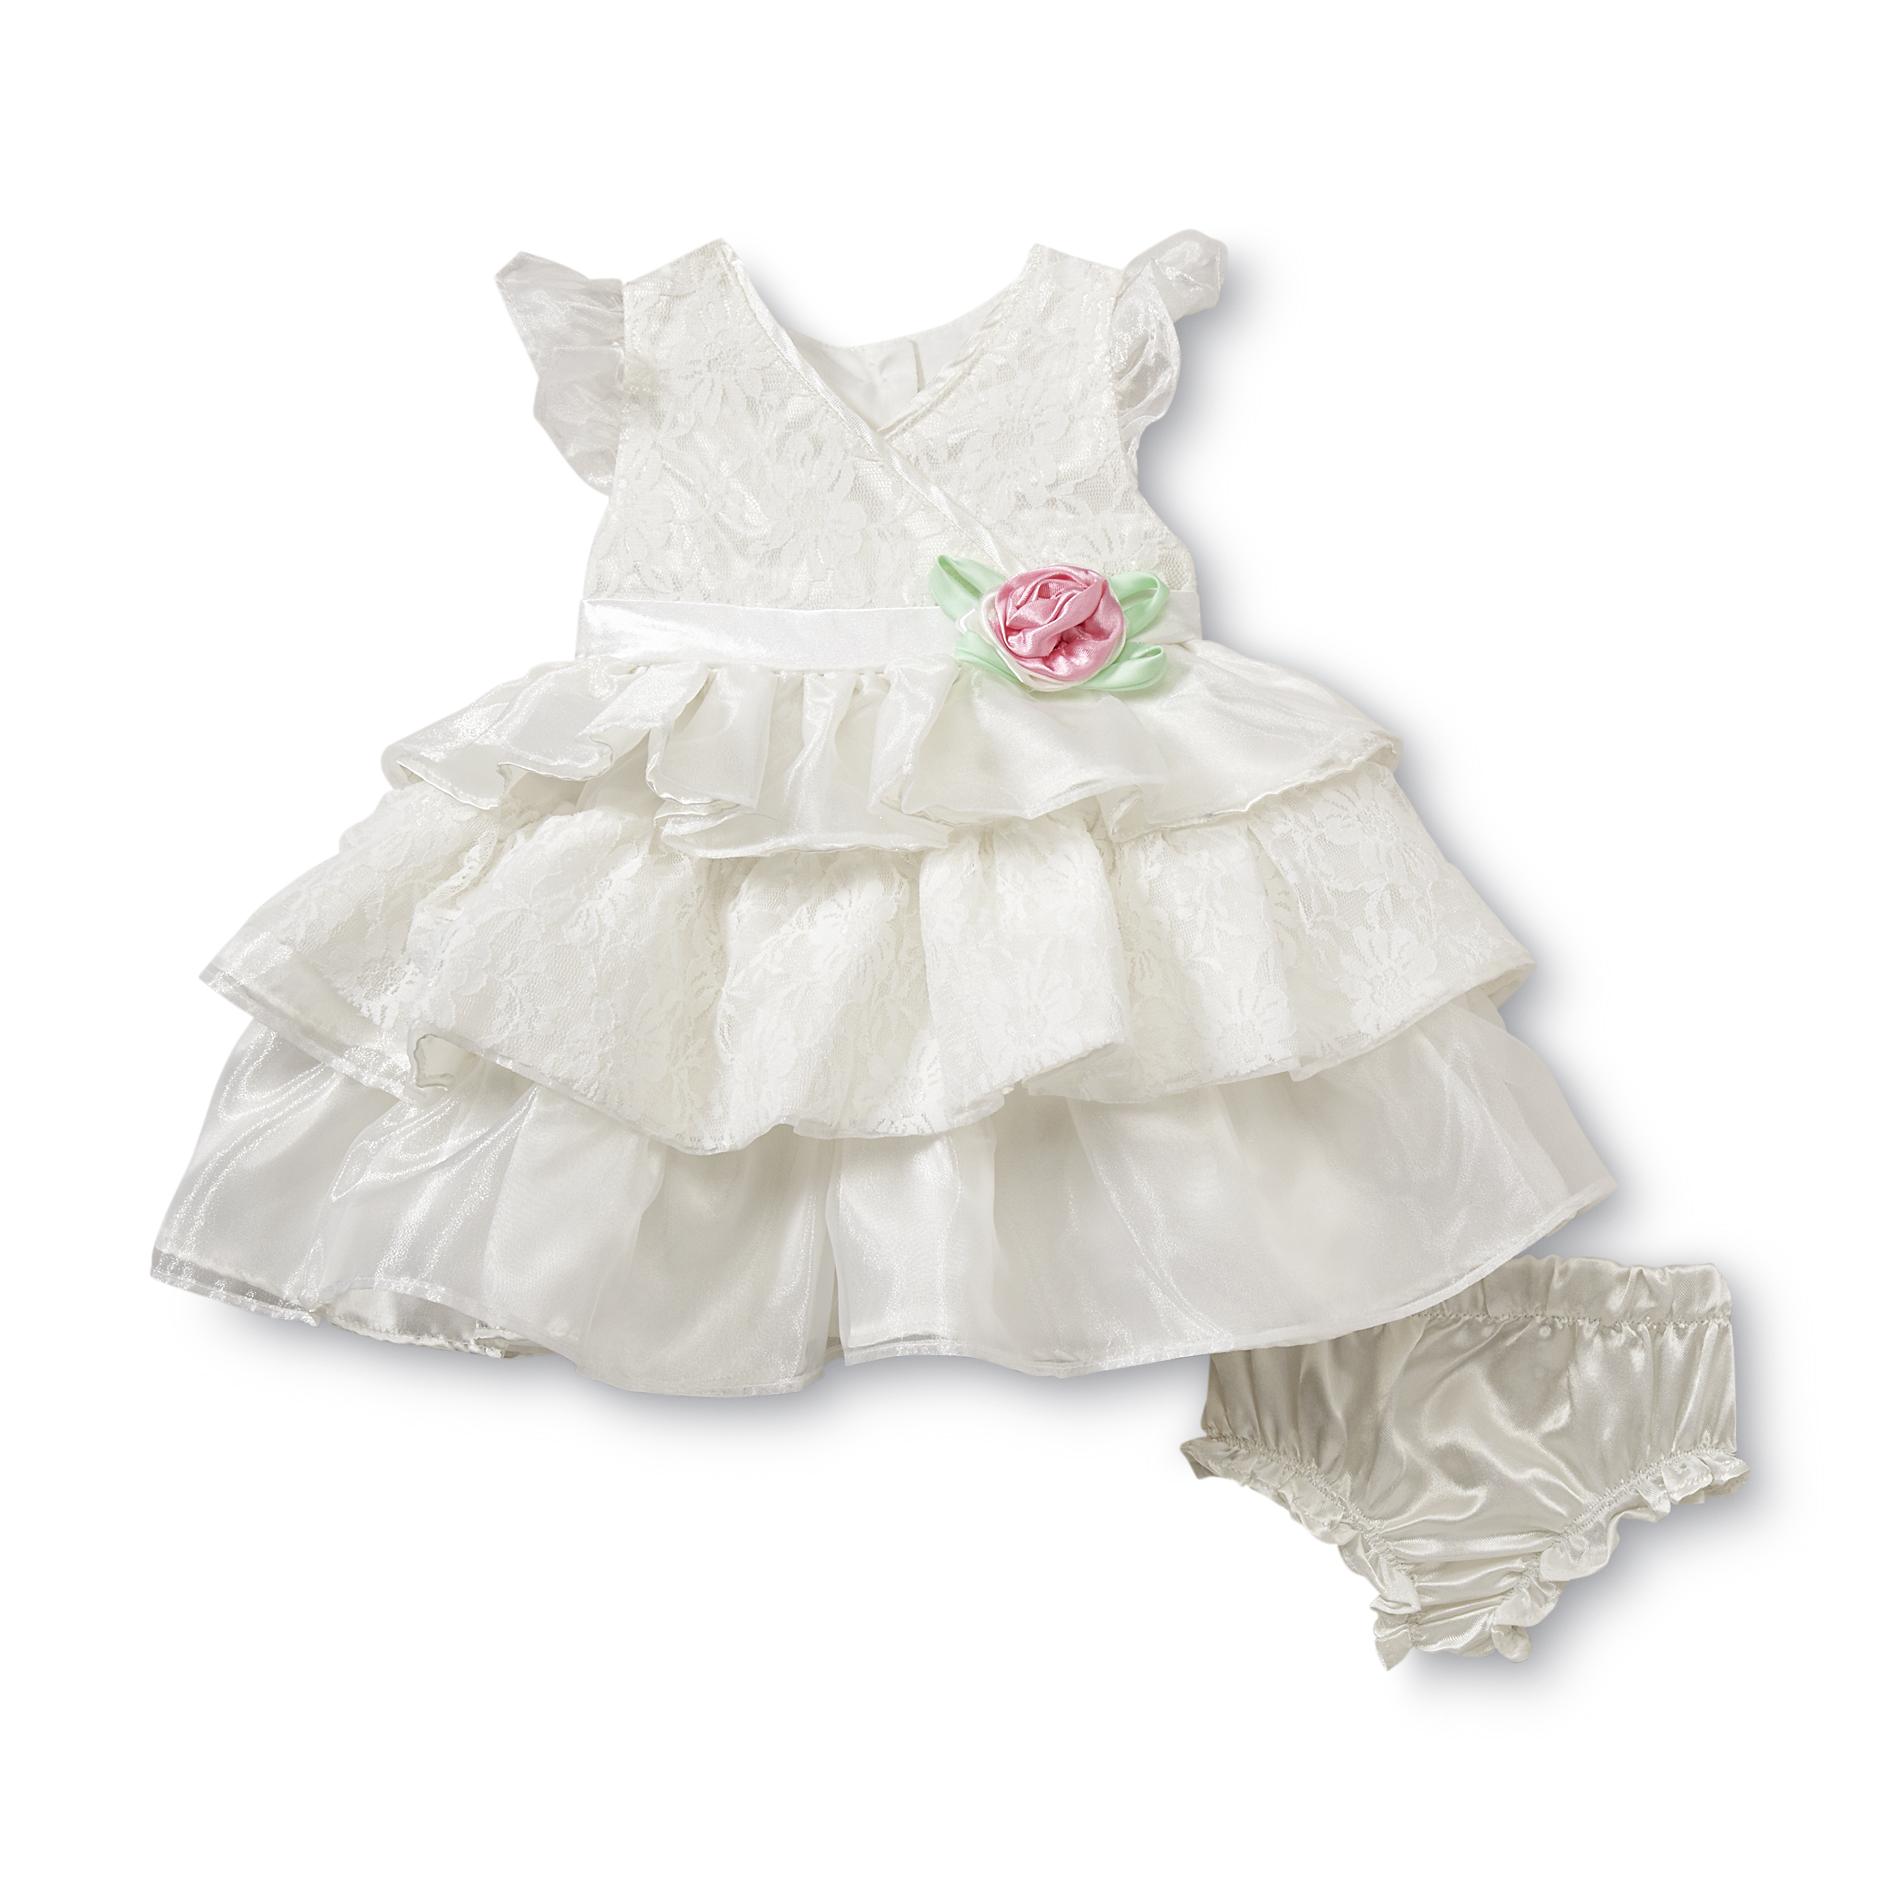 Baby Grand Signature Infant Girl's Party Dress & Diaper Cover